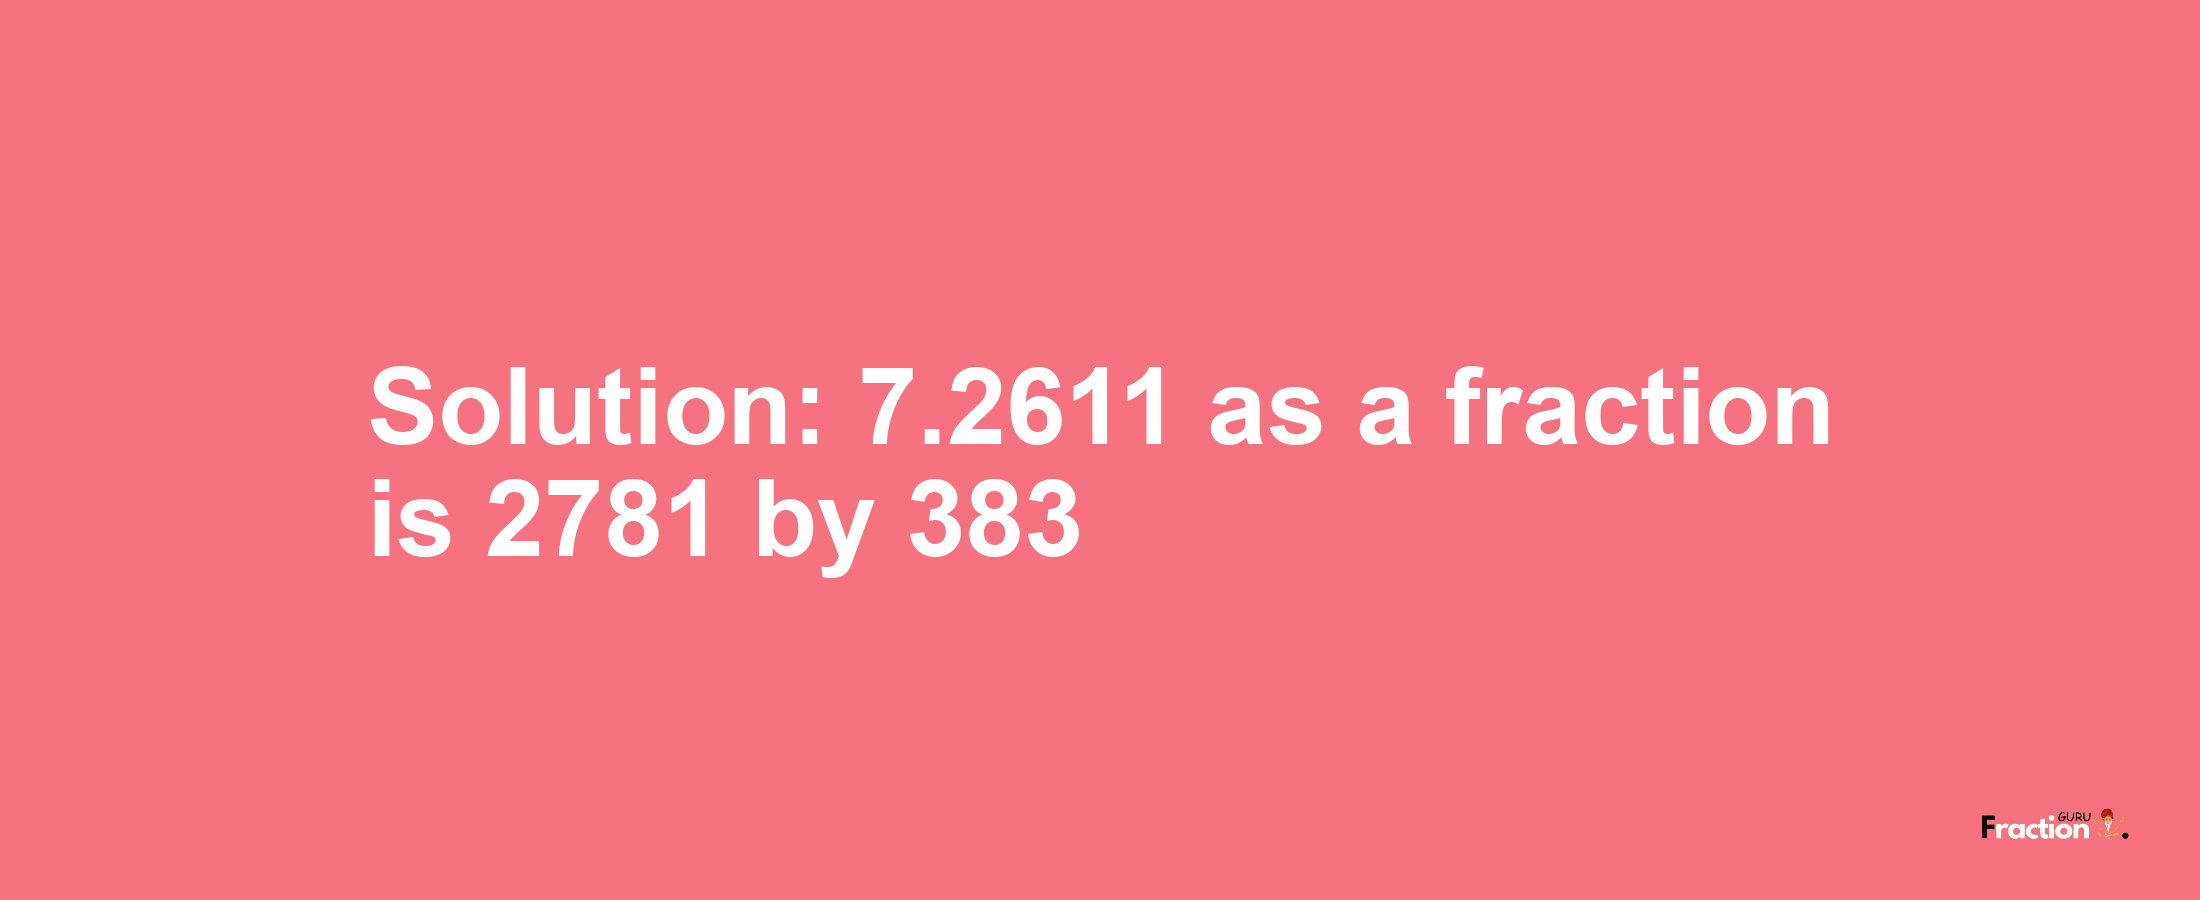 Solution:7.2611 as a fraction is 2781/383